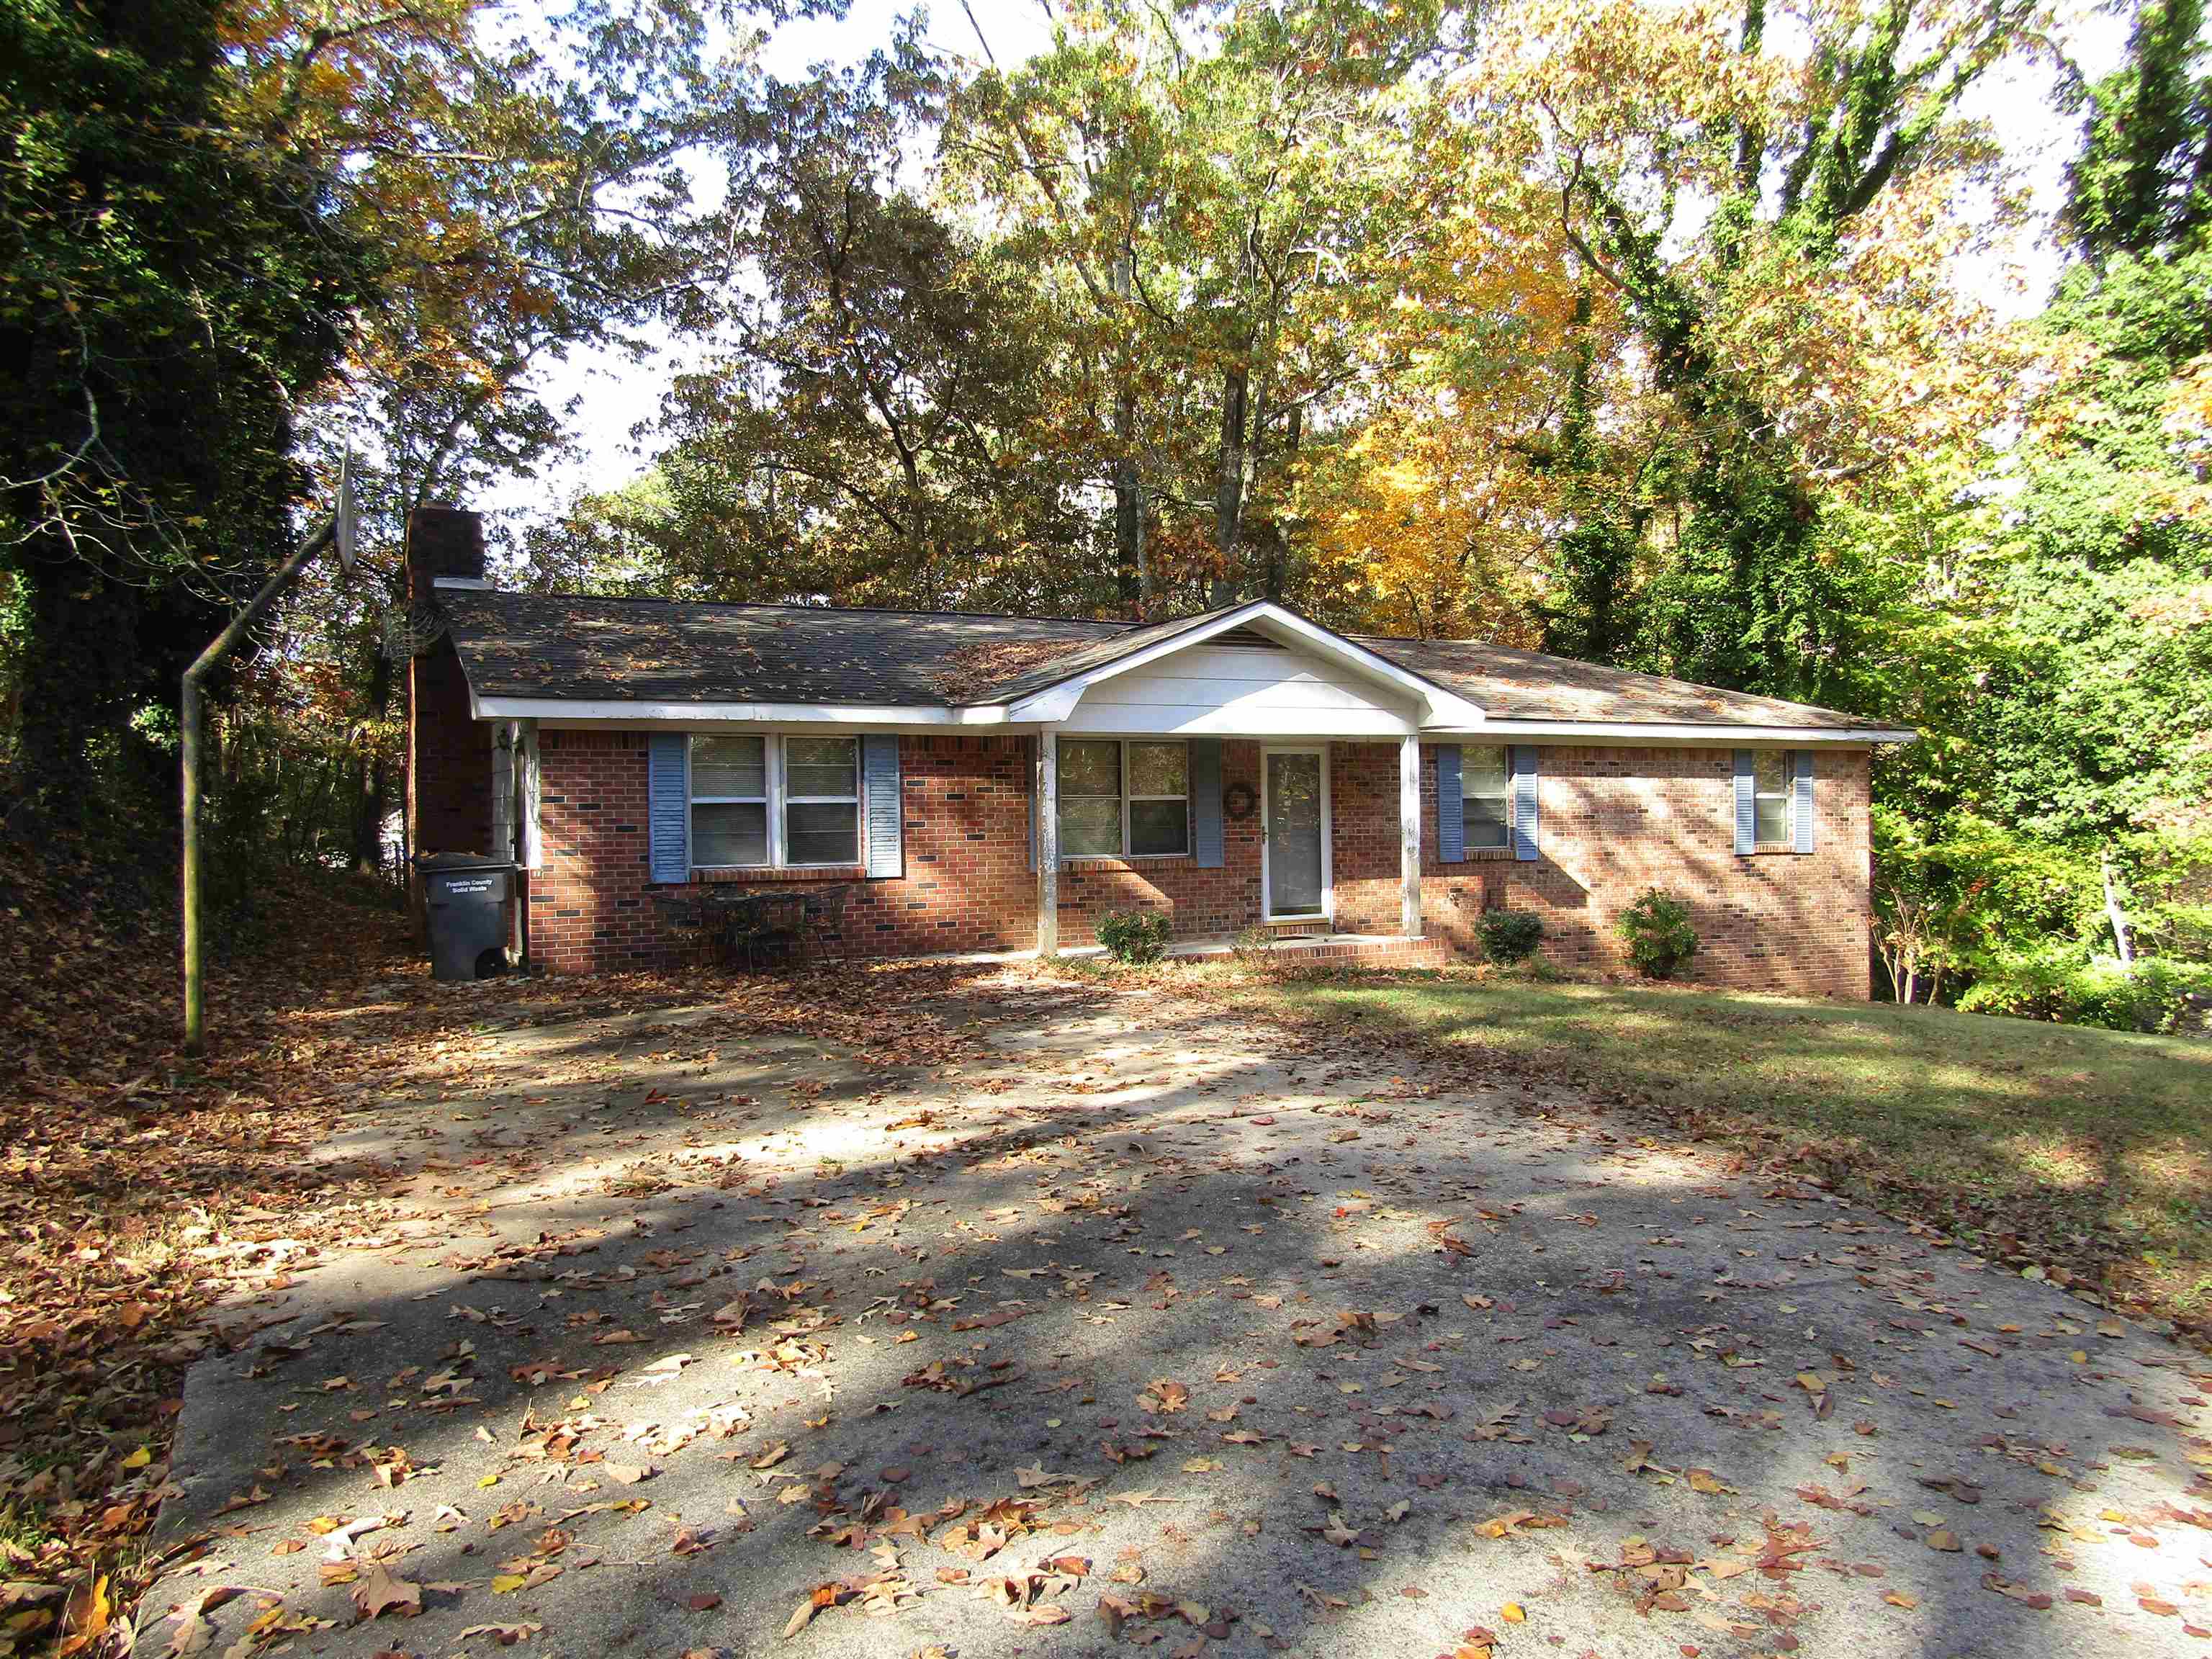 Great location!! Only blocks from Russellville Schools.  Great starter home... 3 bedroom 1.5 bath brick rancher.  Carport has been enclosed for another living area with beautiful brick fireplace and large inside laundry room.  New deck has been built so you can enjoy the private backyard.  With just a little TLC, you can make it your own!